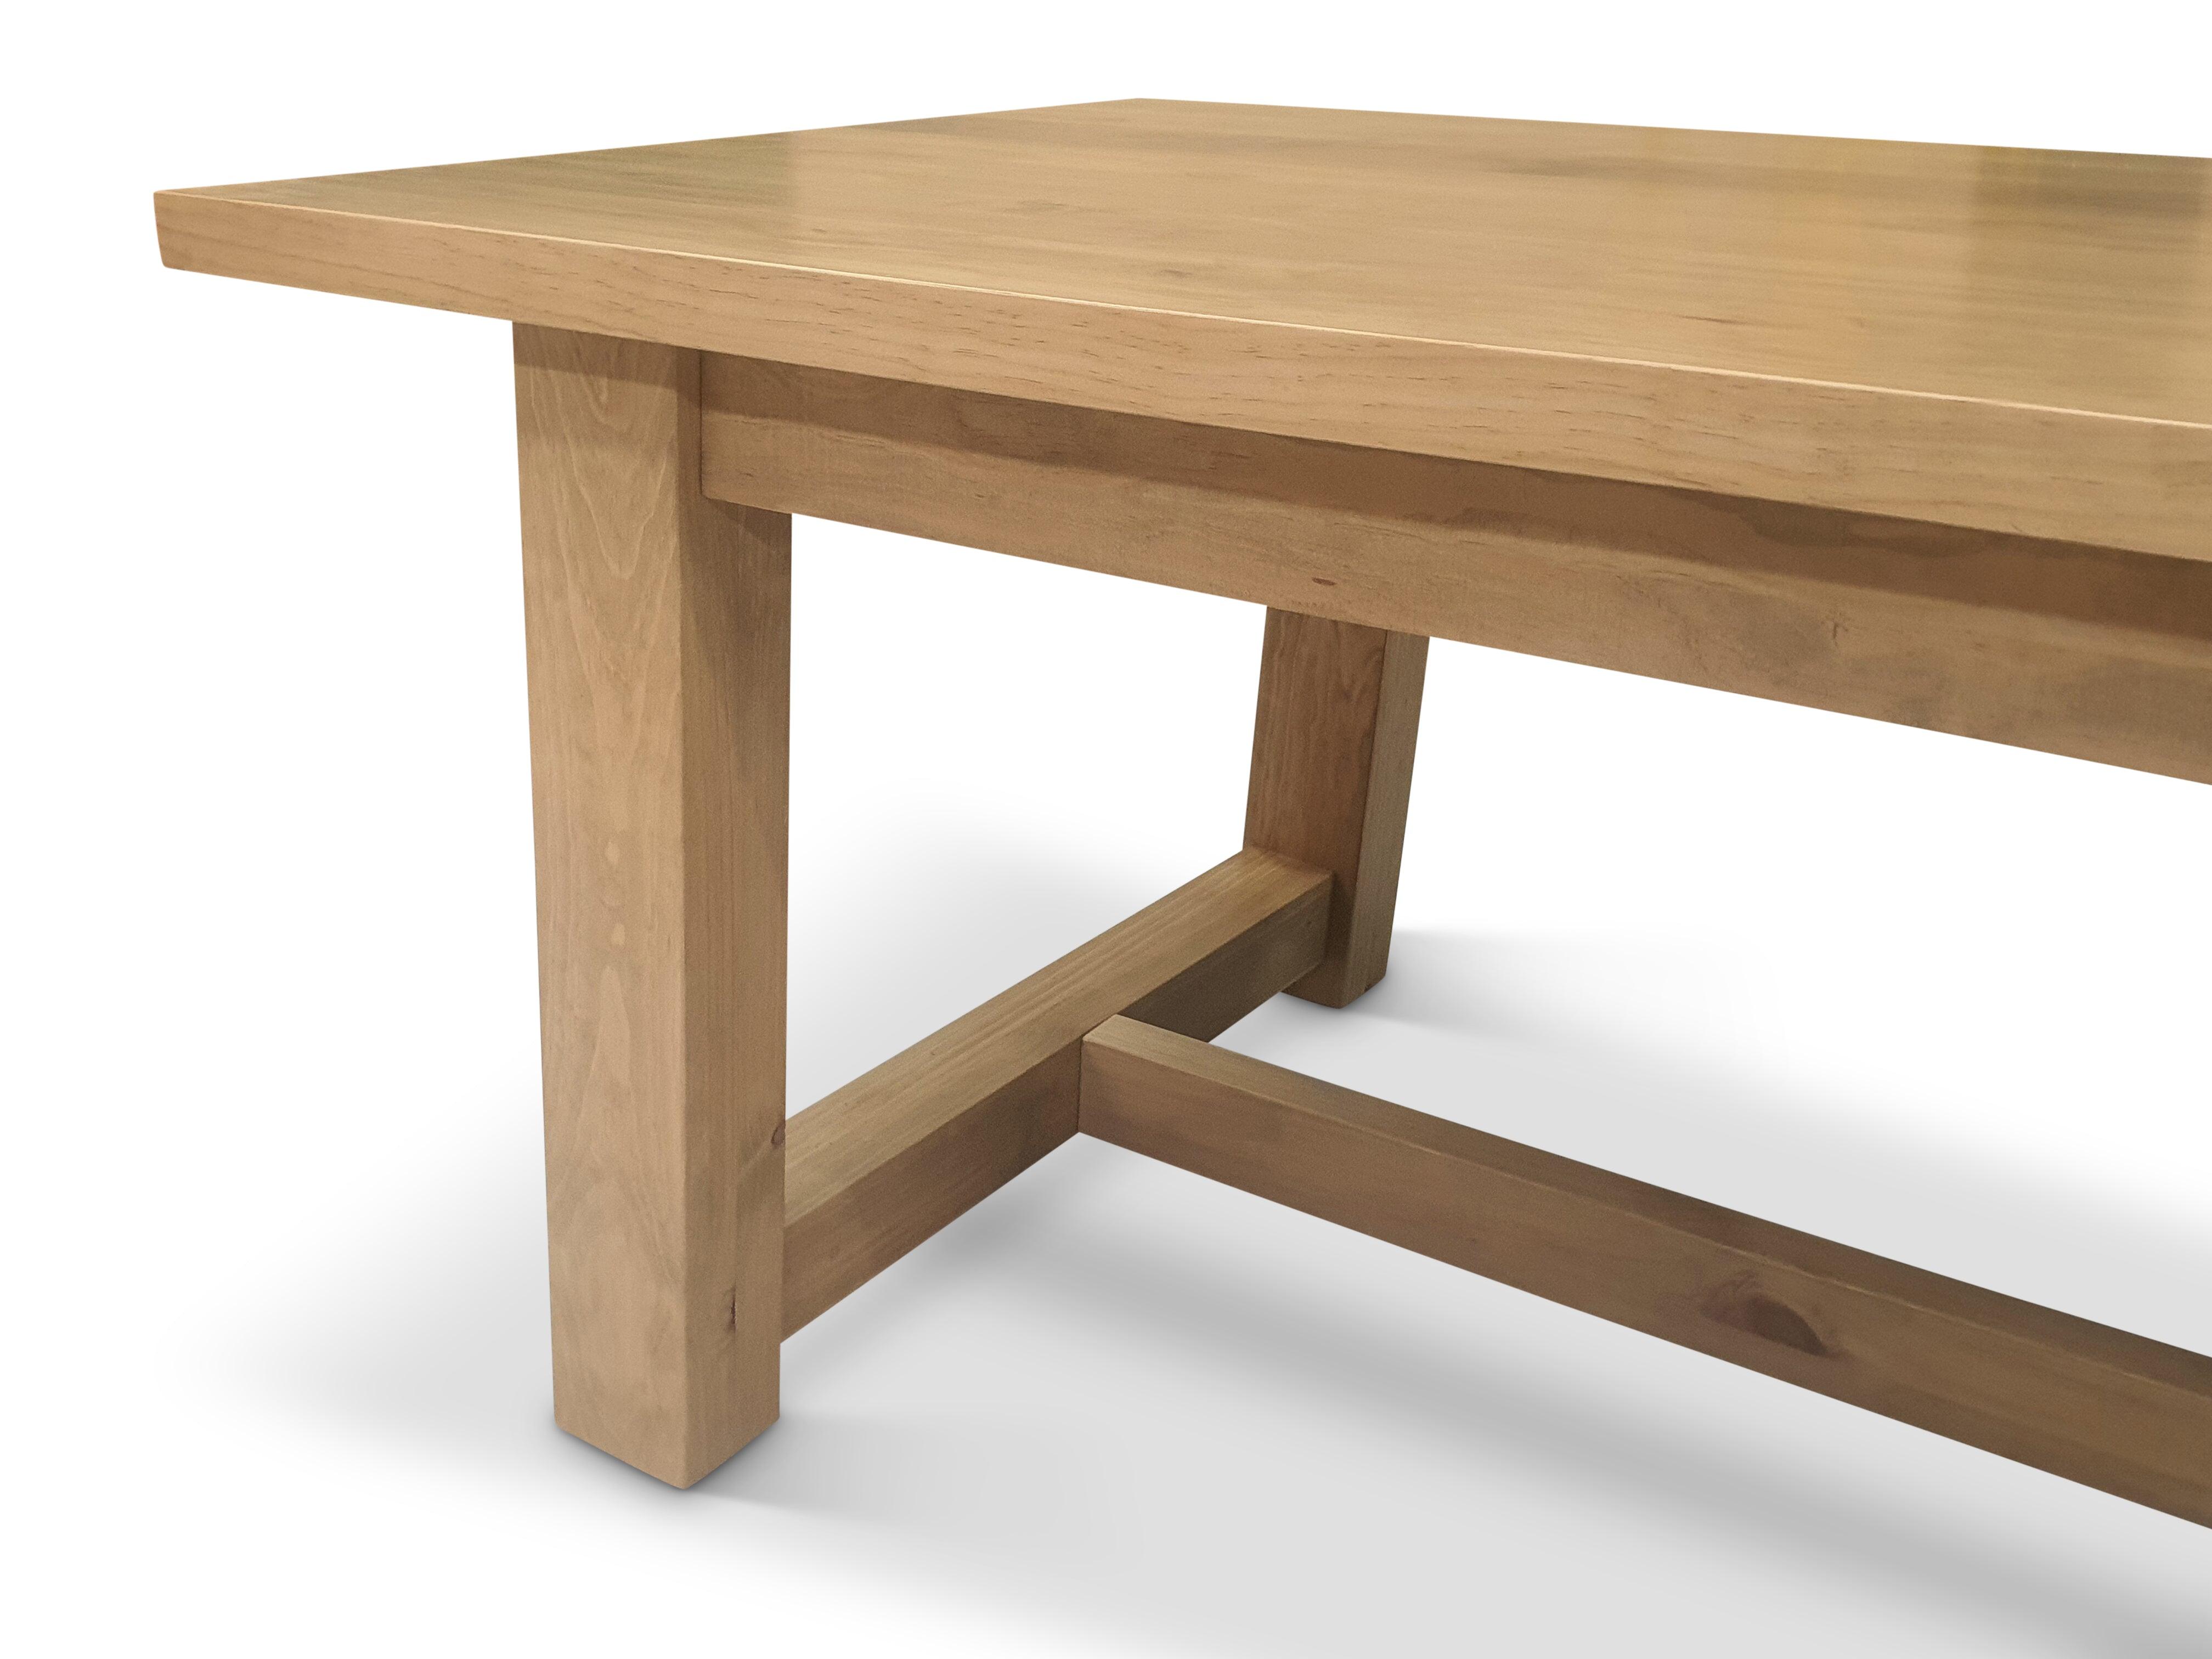 Angled Timber Frame Dining Table - Innate Furniture